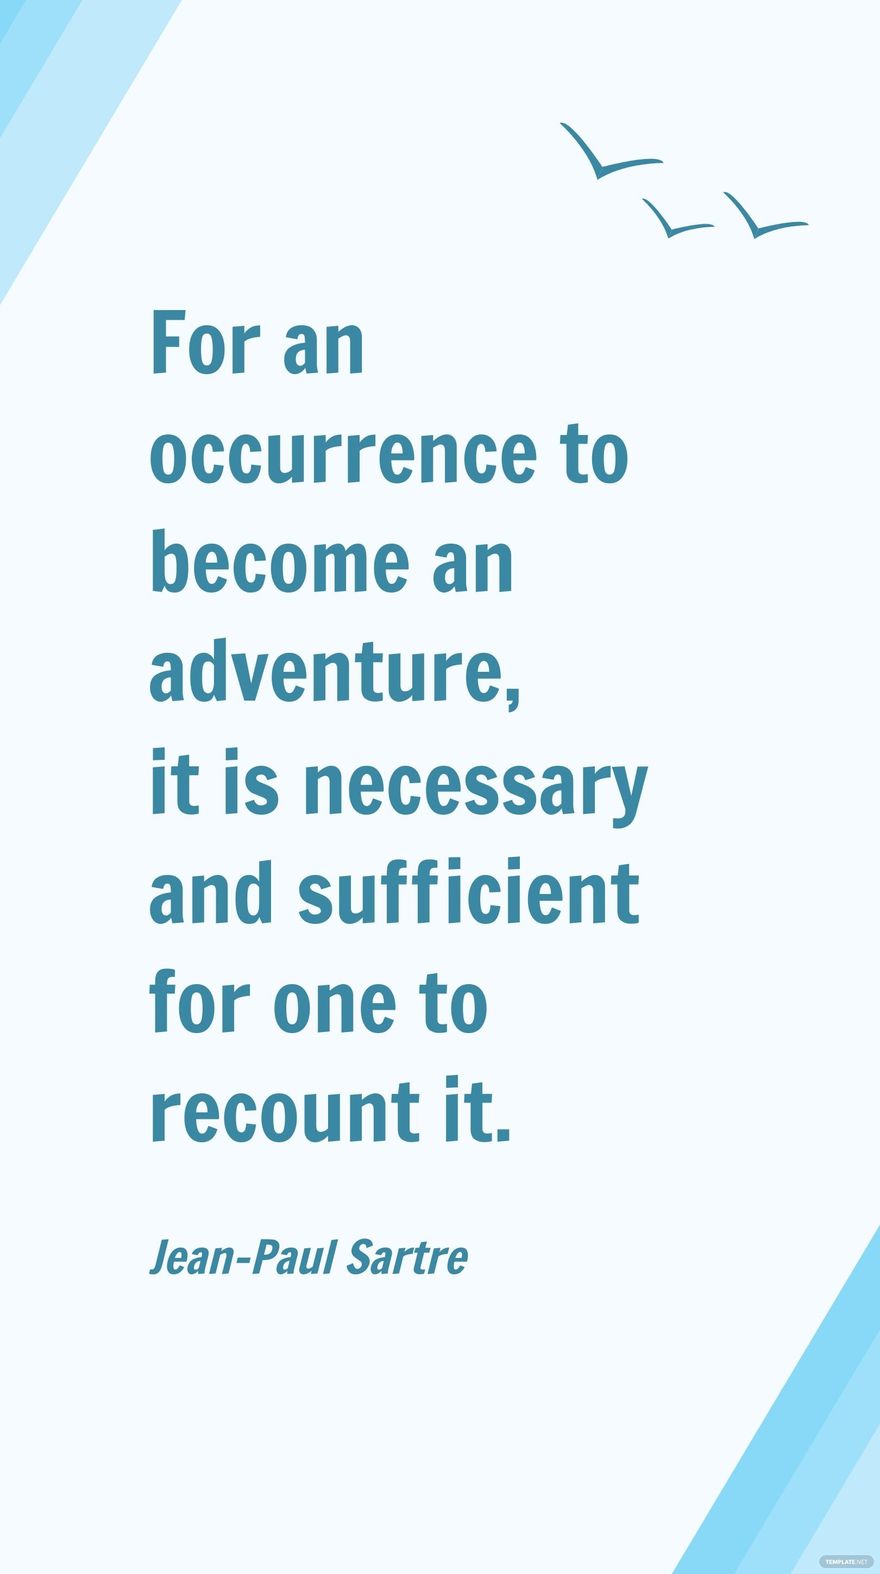 Free Jean-Paul Sartre - For an occurrence to become an adventure, it is necessary and sufficient for one to recount it.